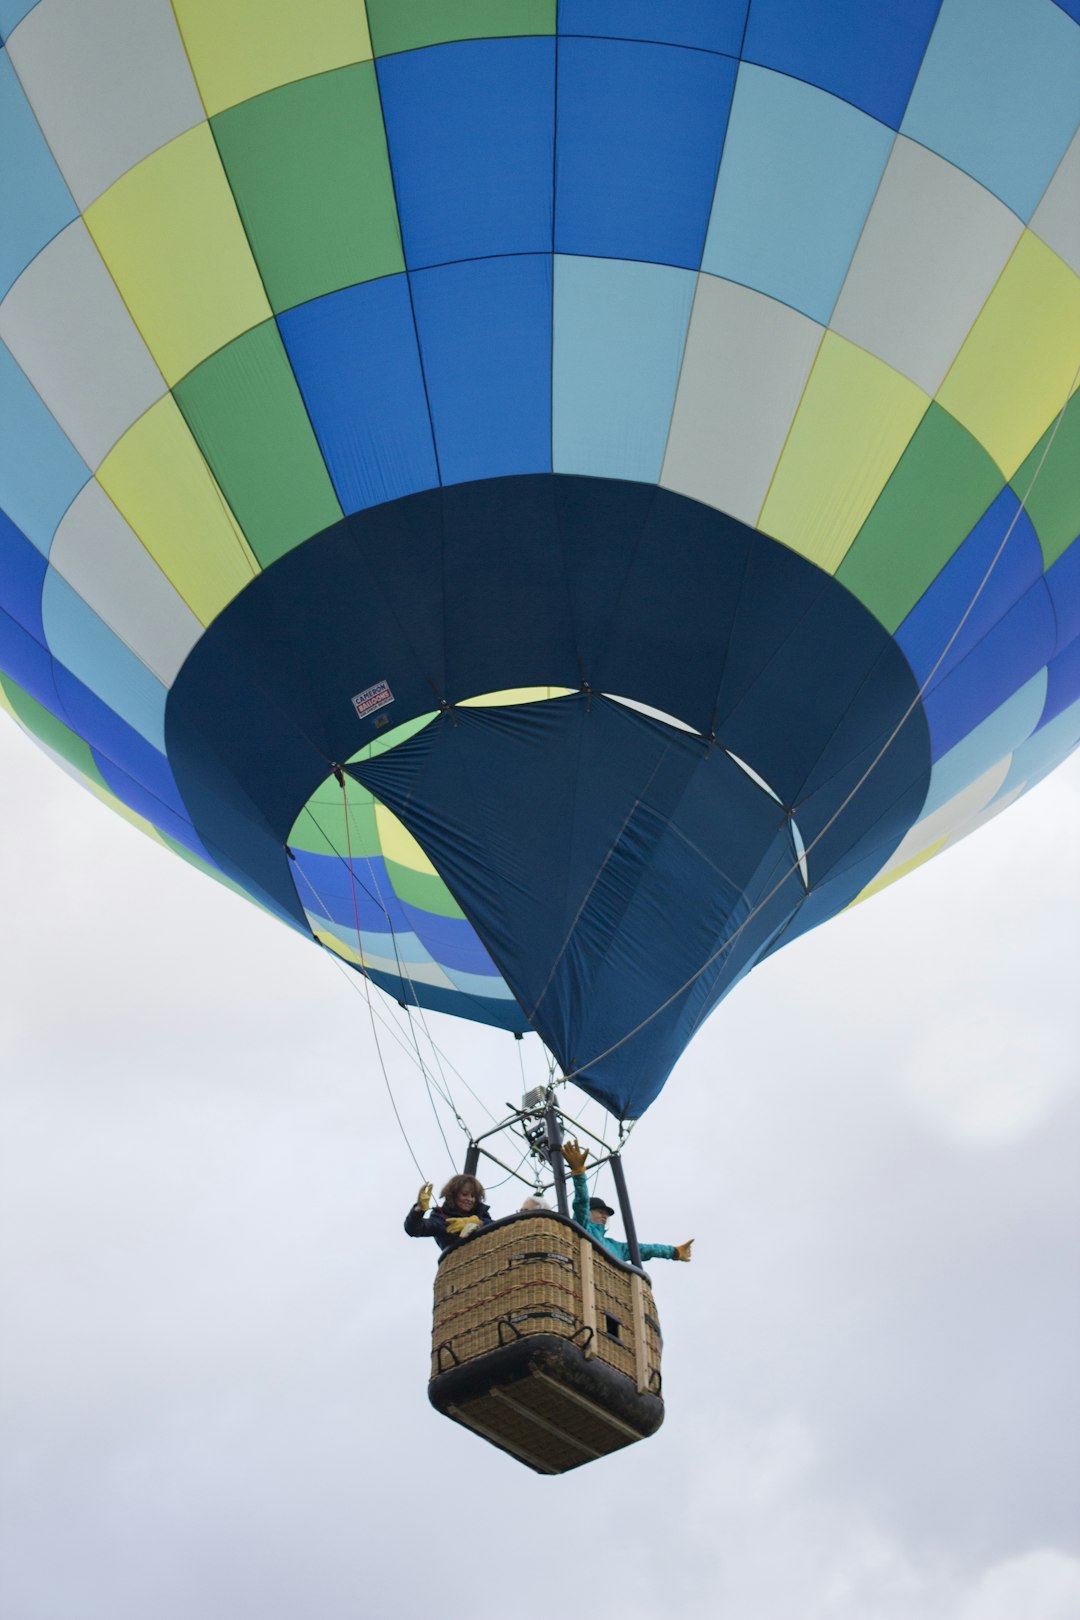 travelers stories about Hot air ballooning in Albuquerque International Balloon Fiesta, United States